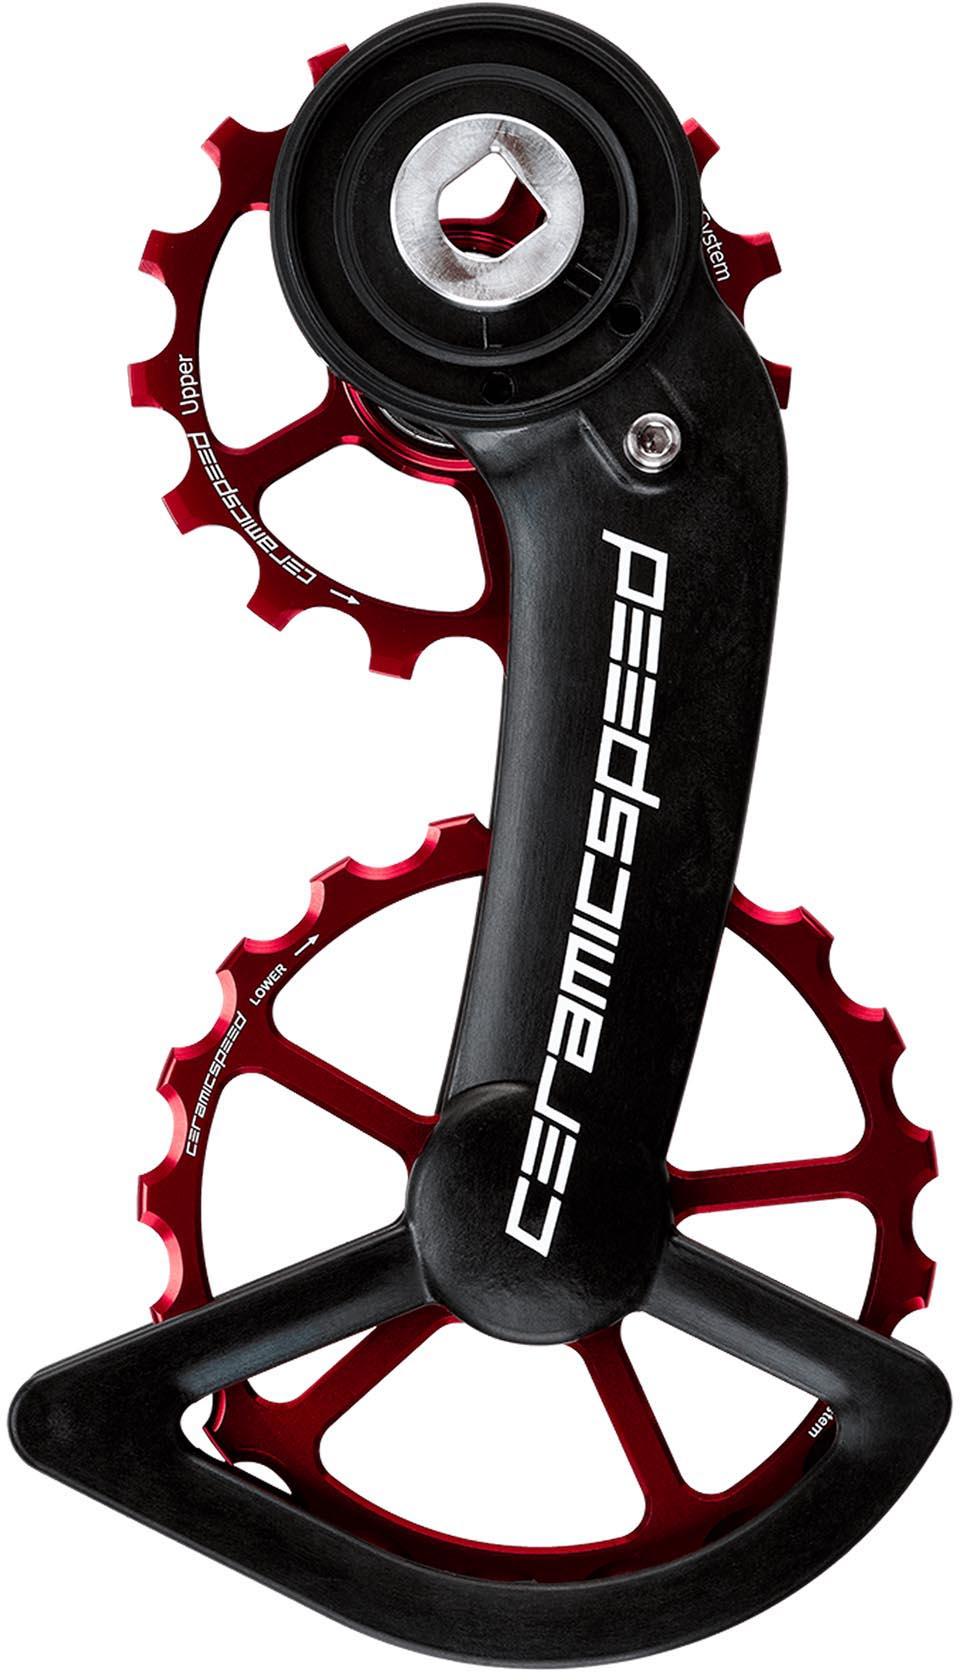 Ceramicspeed Ospw System Sram Red-force Axs  Red